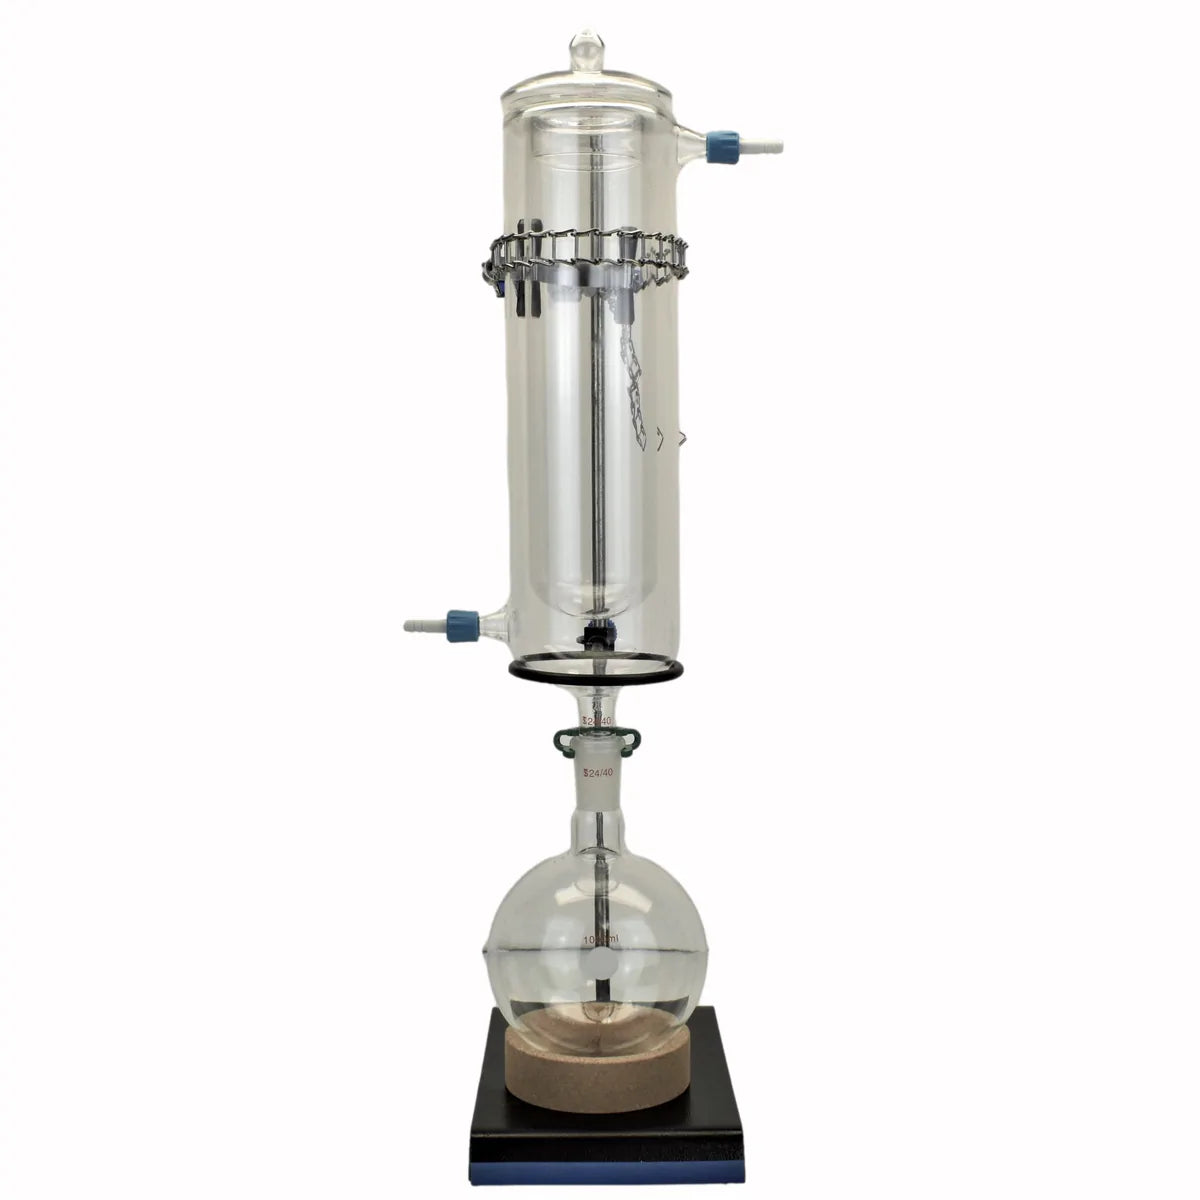 Cold trap for condensing vapors into a liquid or solid Sold by Viking Lab Supply